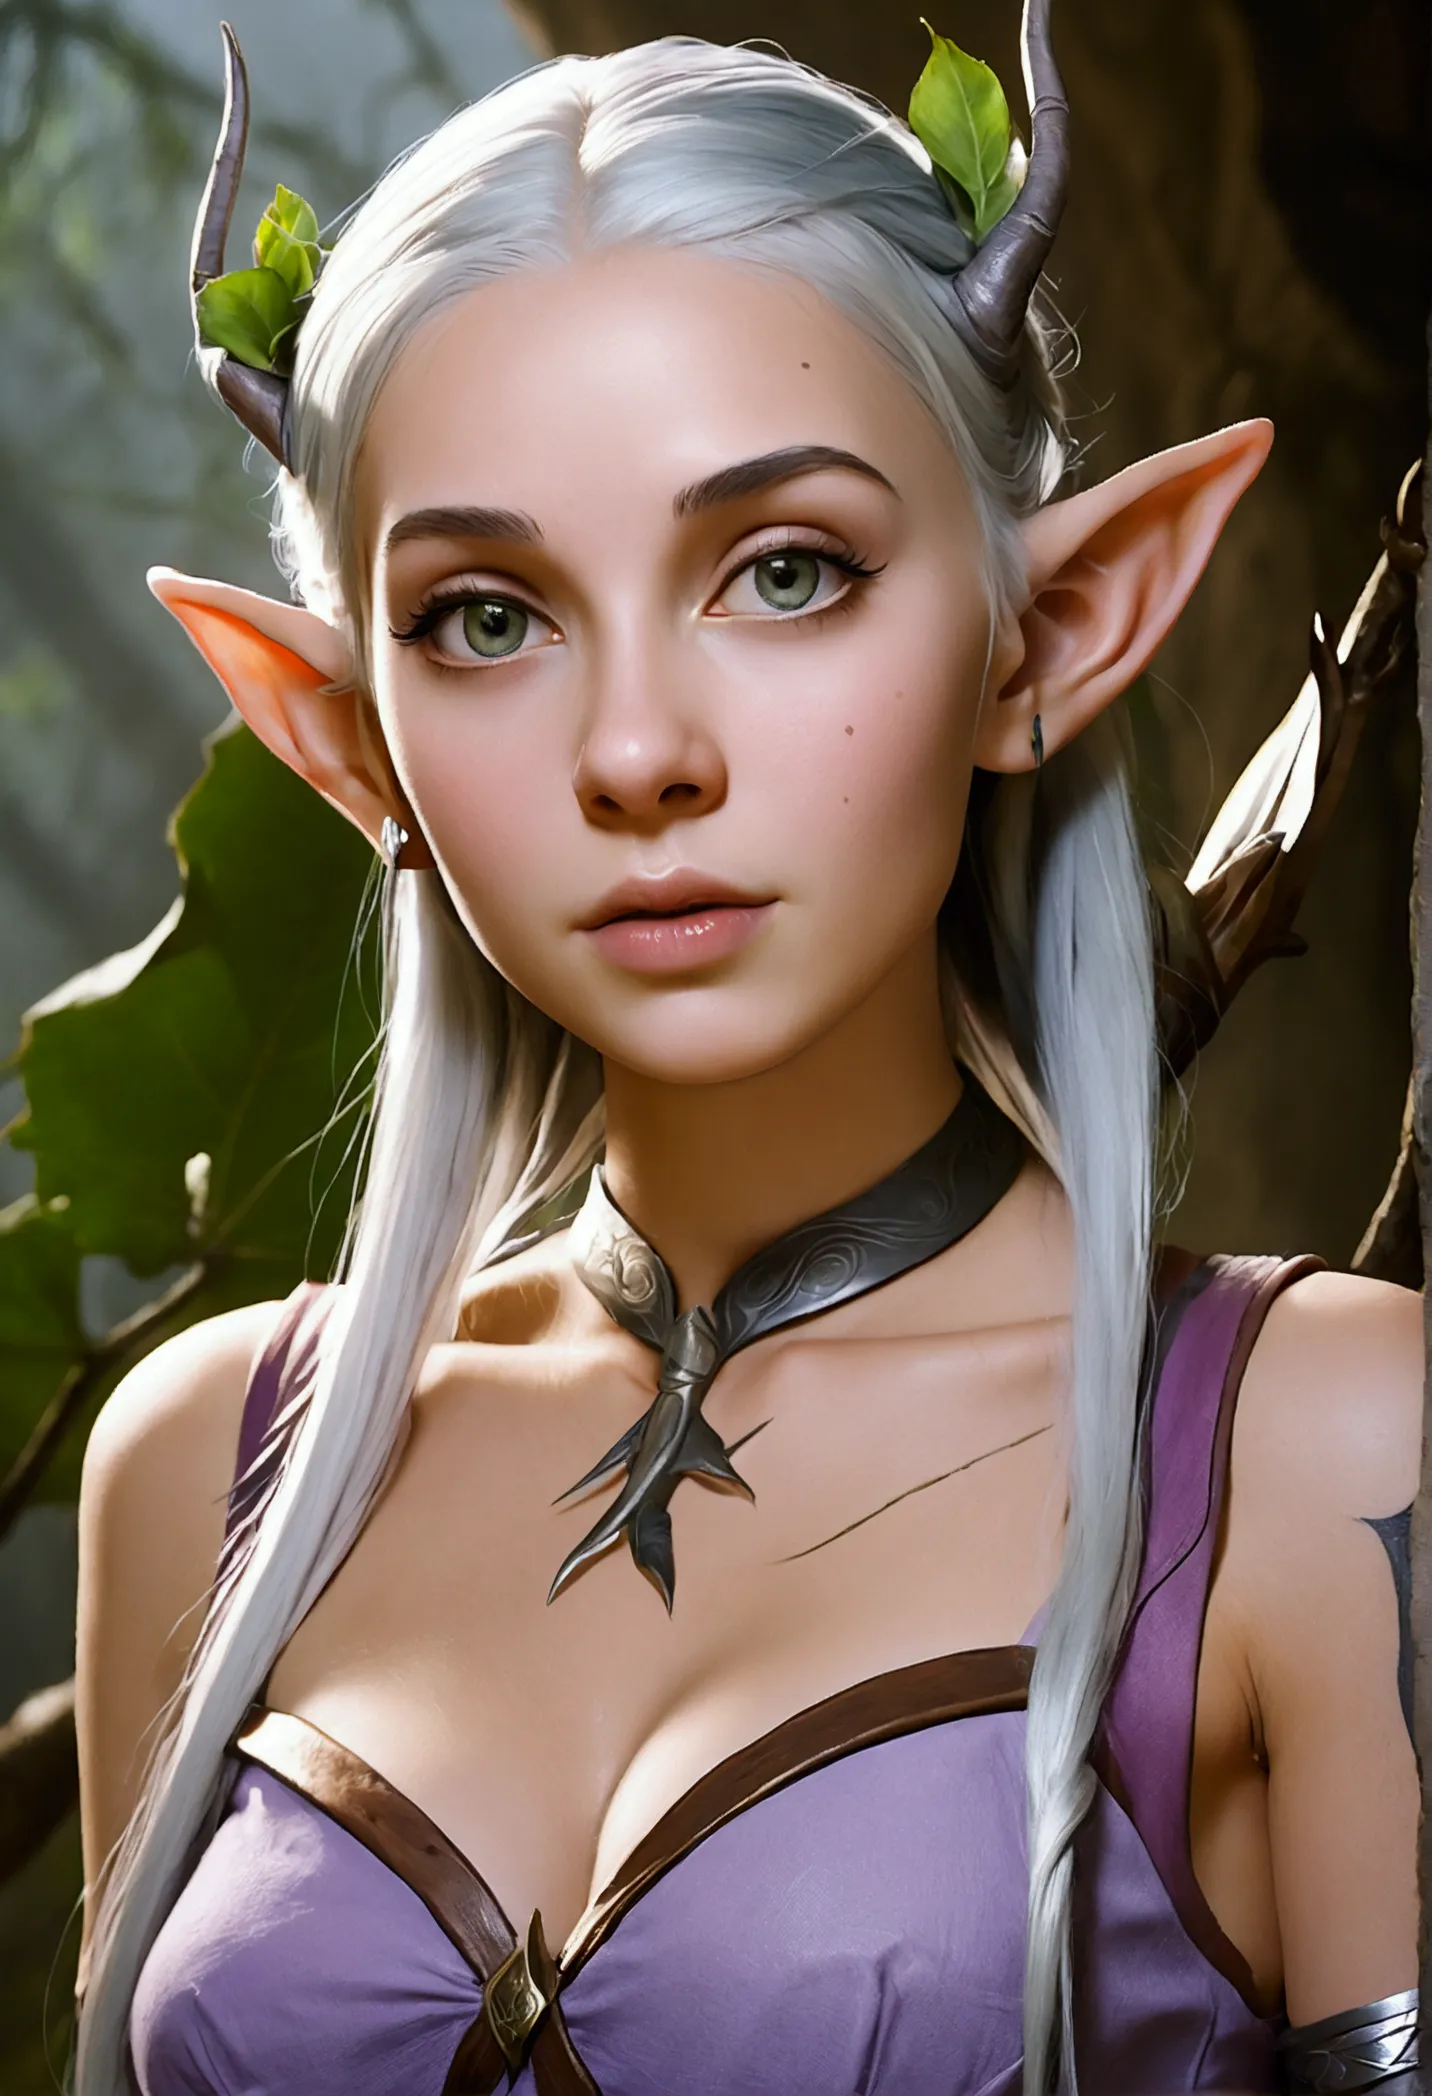 A young Elf with the tips of her ears forked and those forks crossing, a very attractive and exposed body, long, silver hair wit...